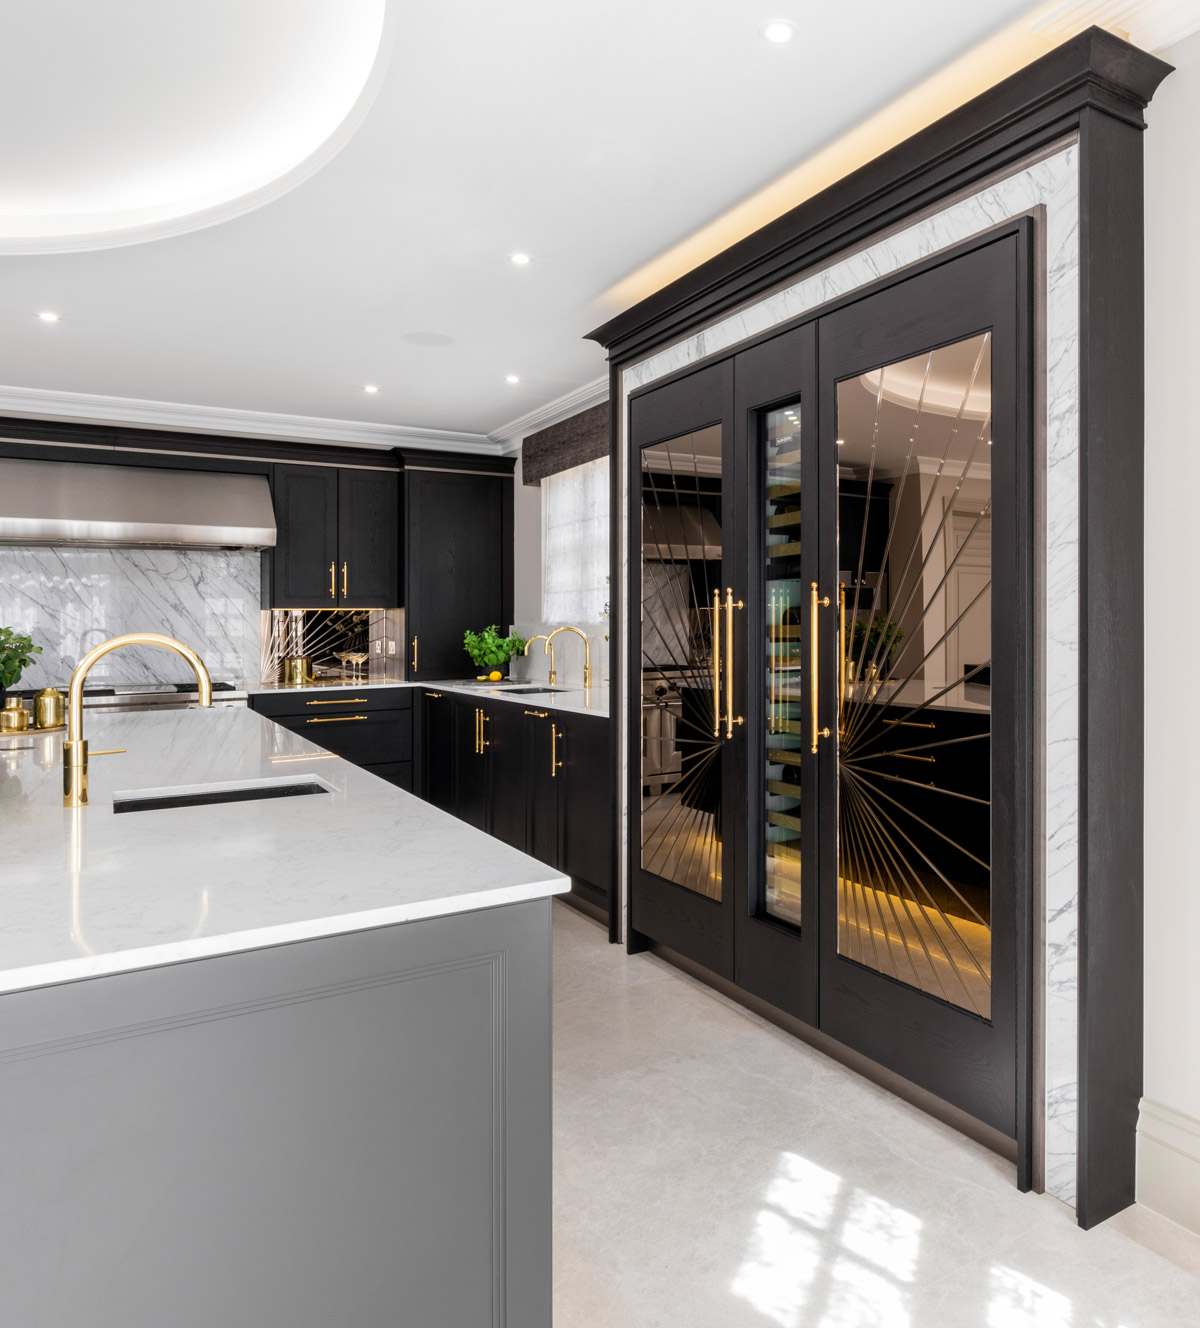 personal kitchen design, Kitchen Design that is Based on Emotional Connection and Client Personality